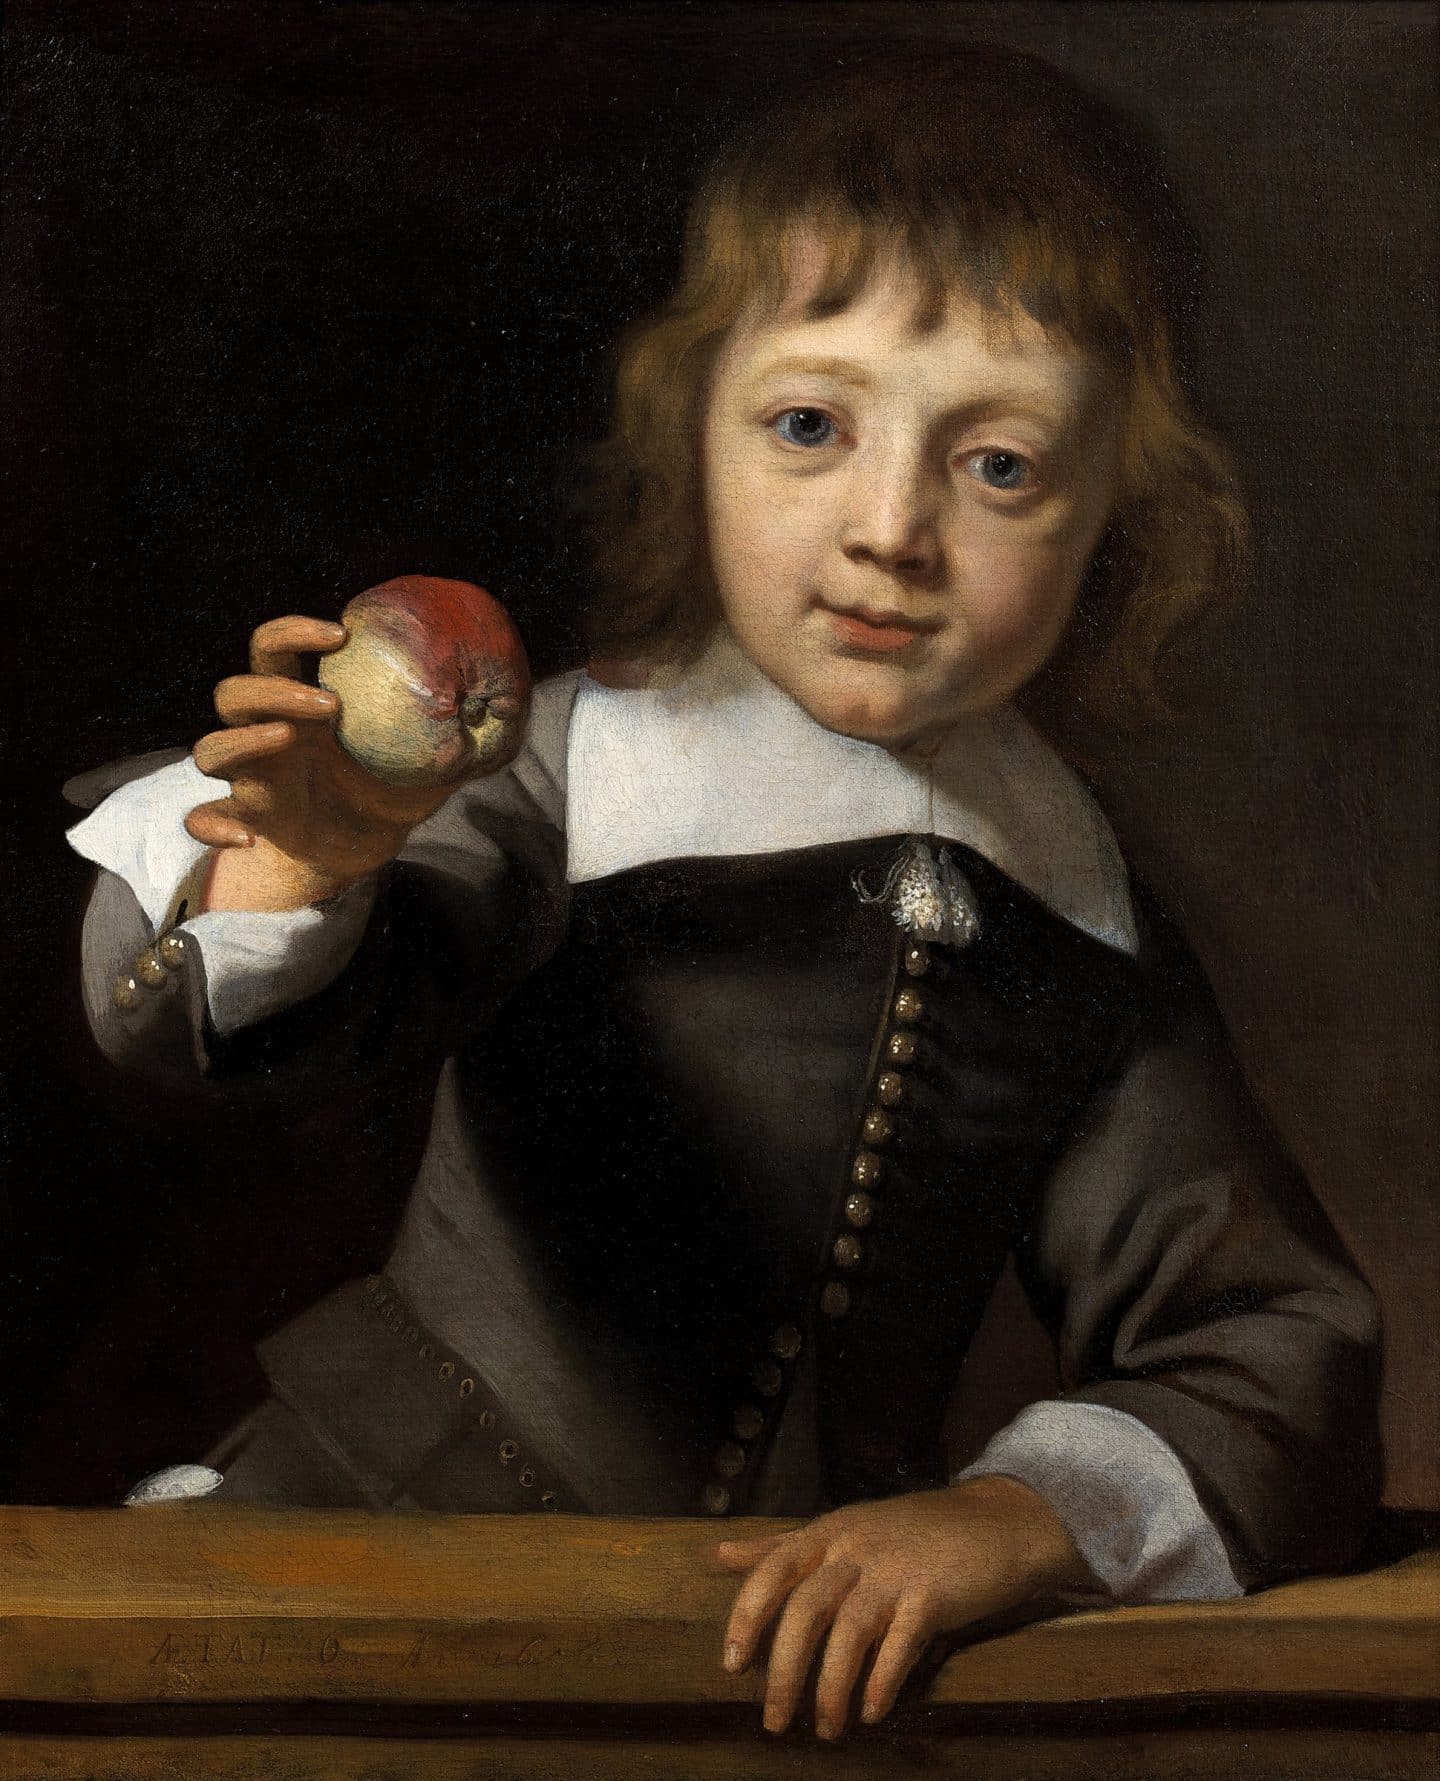 Gerbrand van den Eeckhout, Portrait of a Six-Year-Old Boy Holding an Apple, 1656, oil on canvas. Gift of Isabel and Alfred Bader, 2016 (59-007)